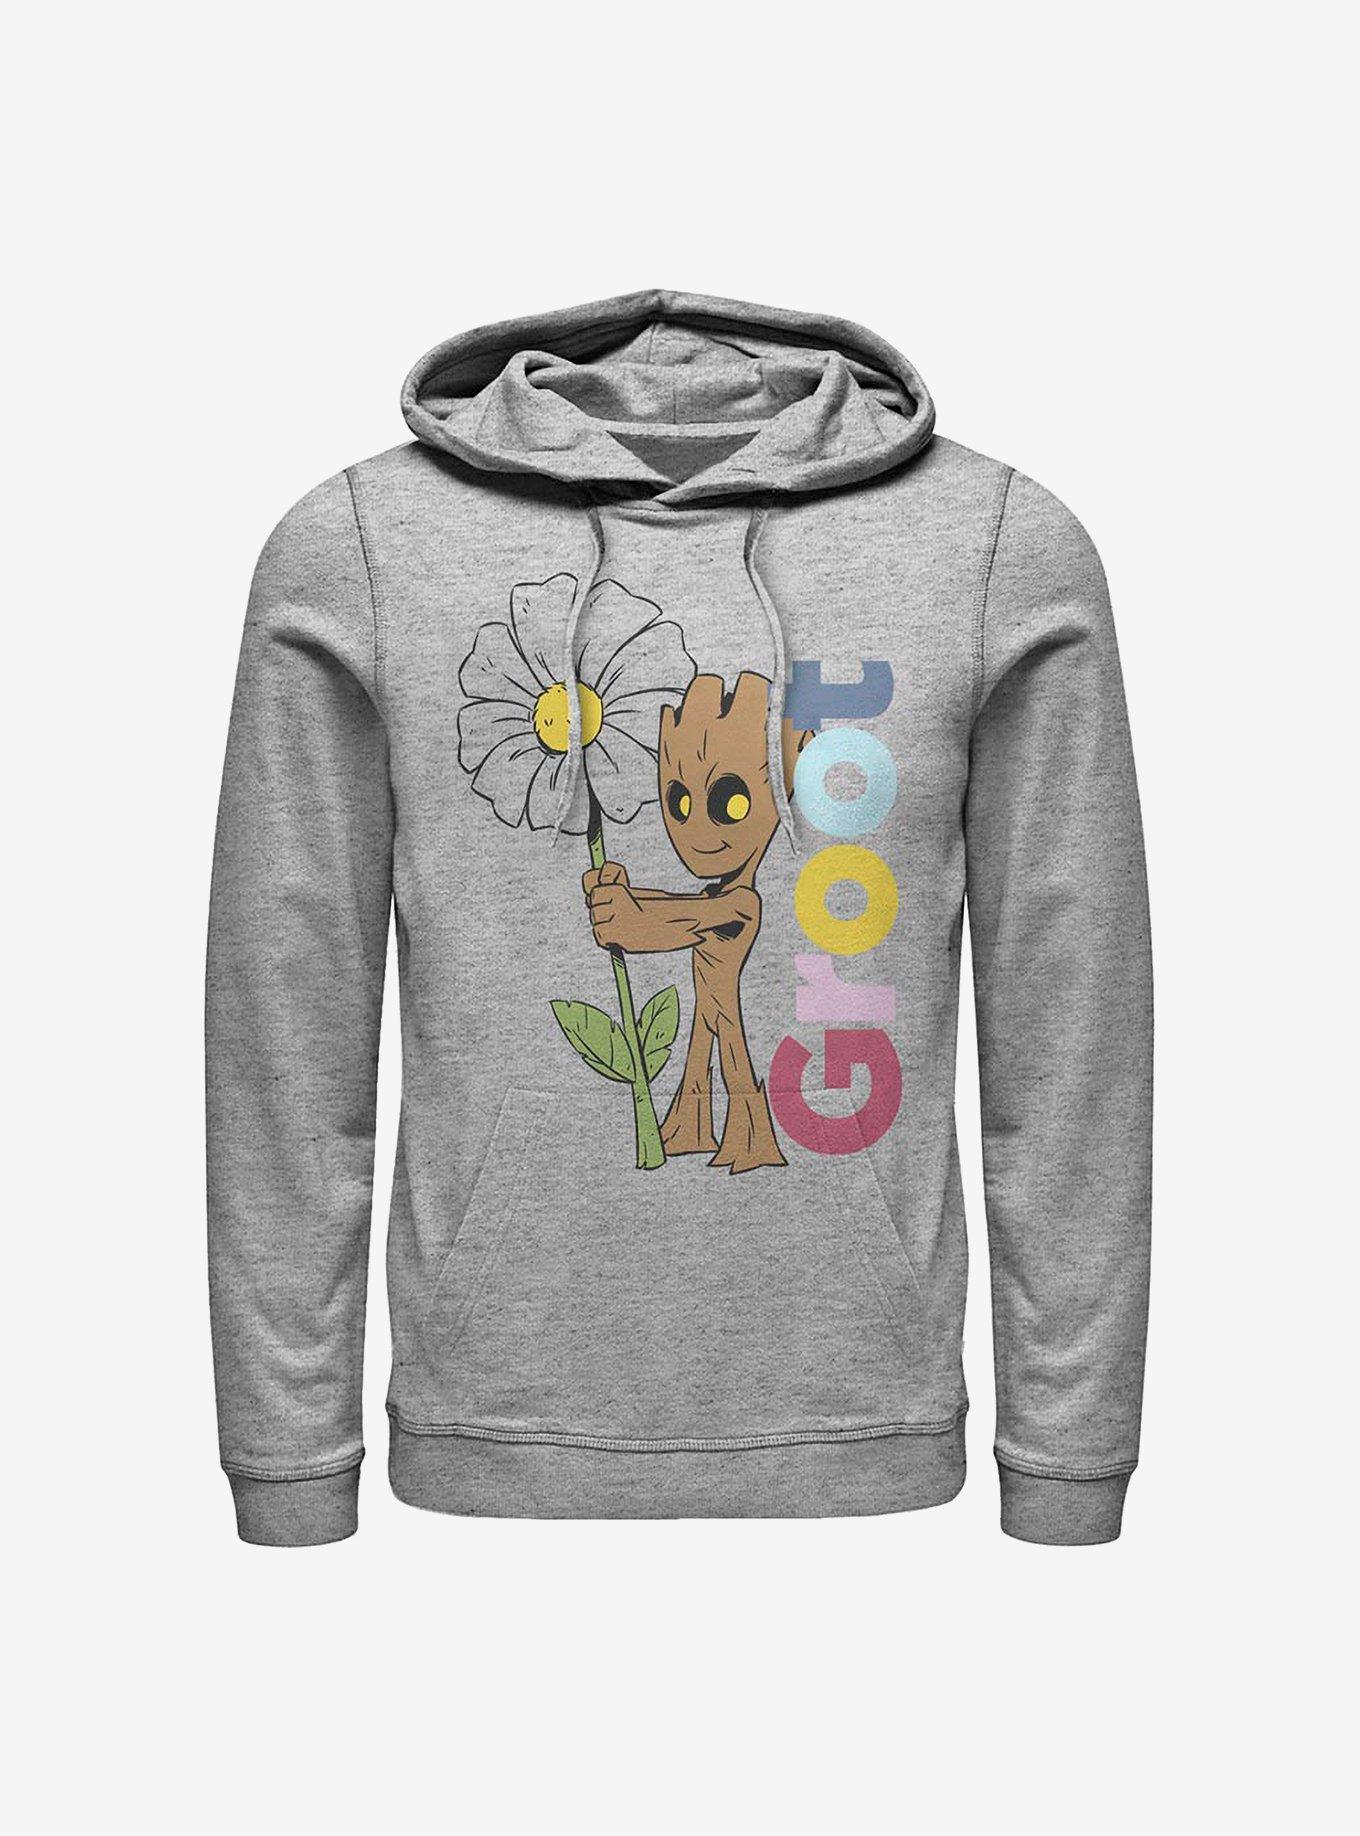 Marvel Guardians Of The Galaxy Groot Daisy Hoodie, ATH HTR, hi-res